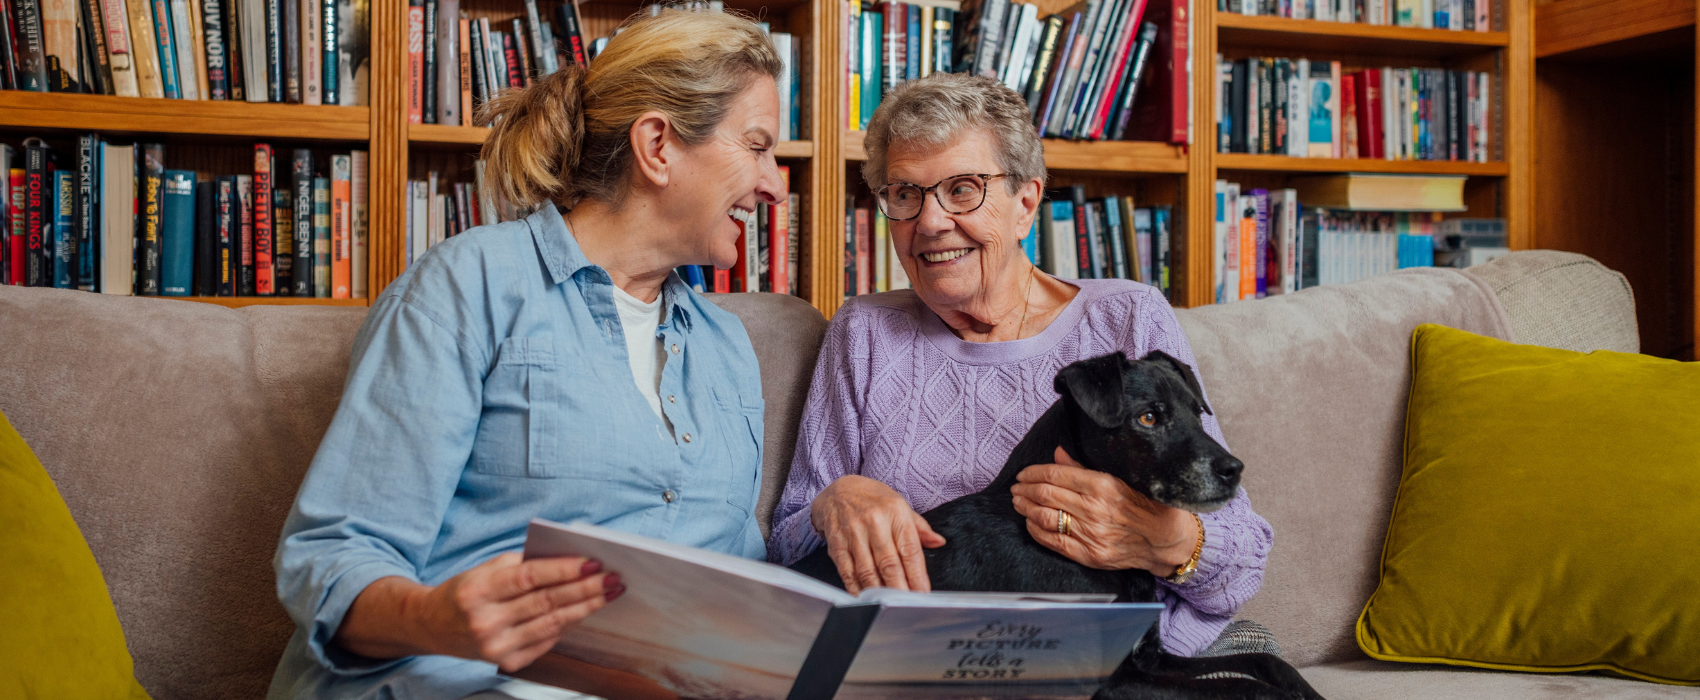 dementia patient and caregiver with dog